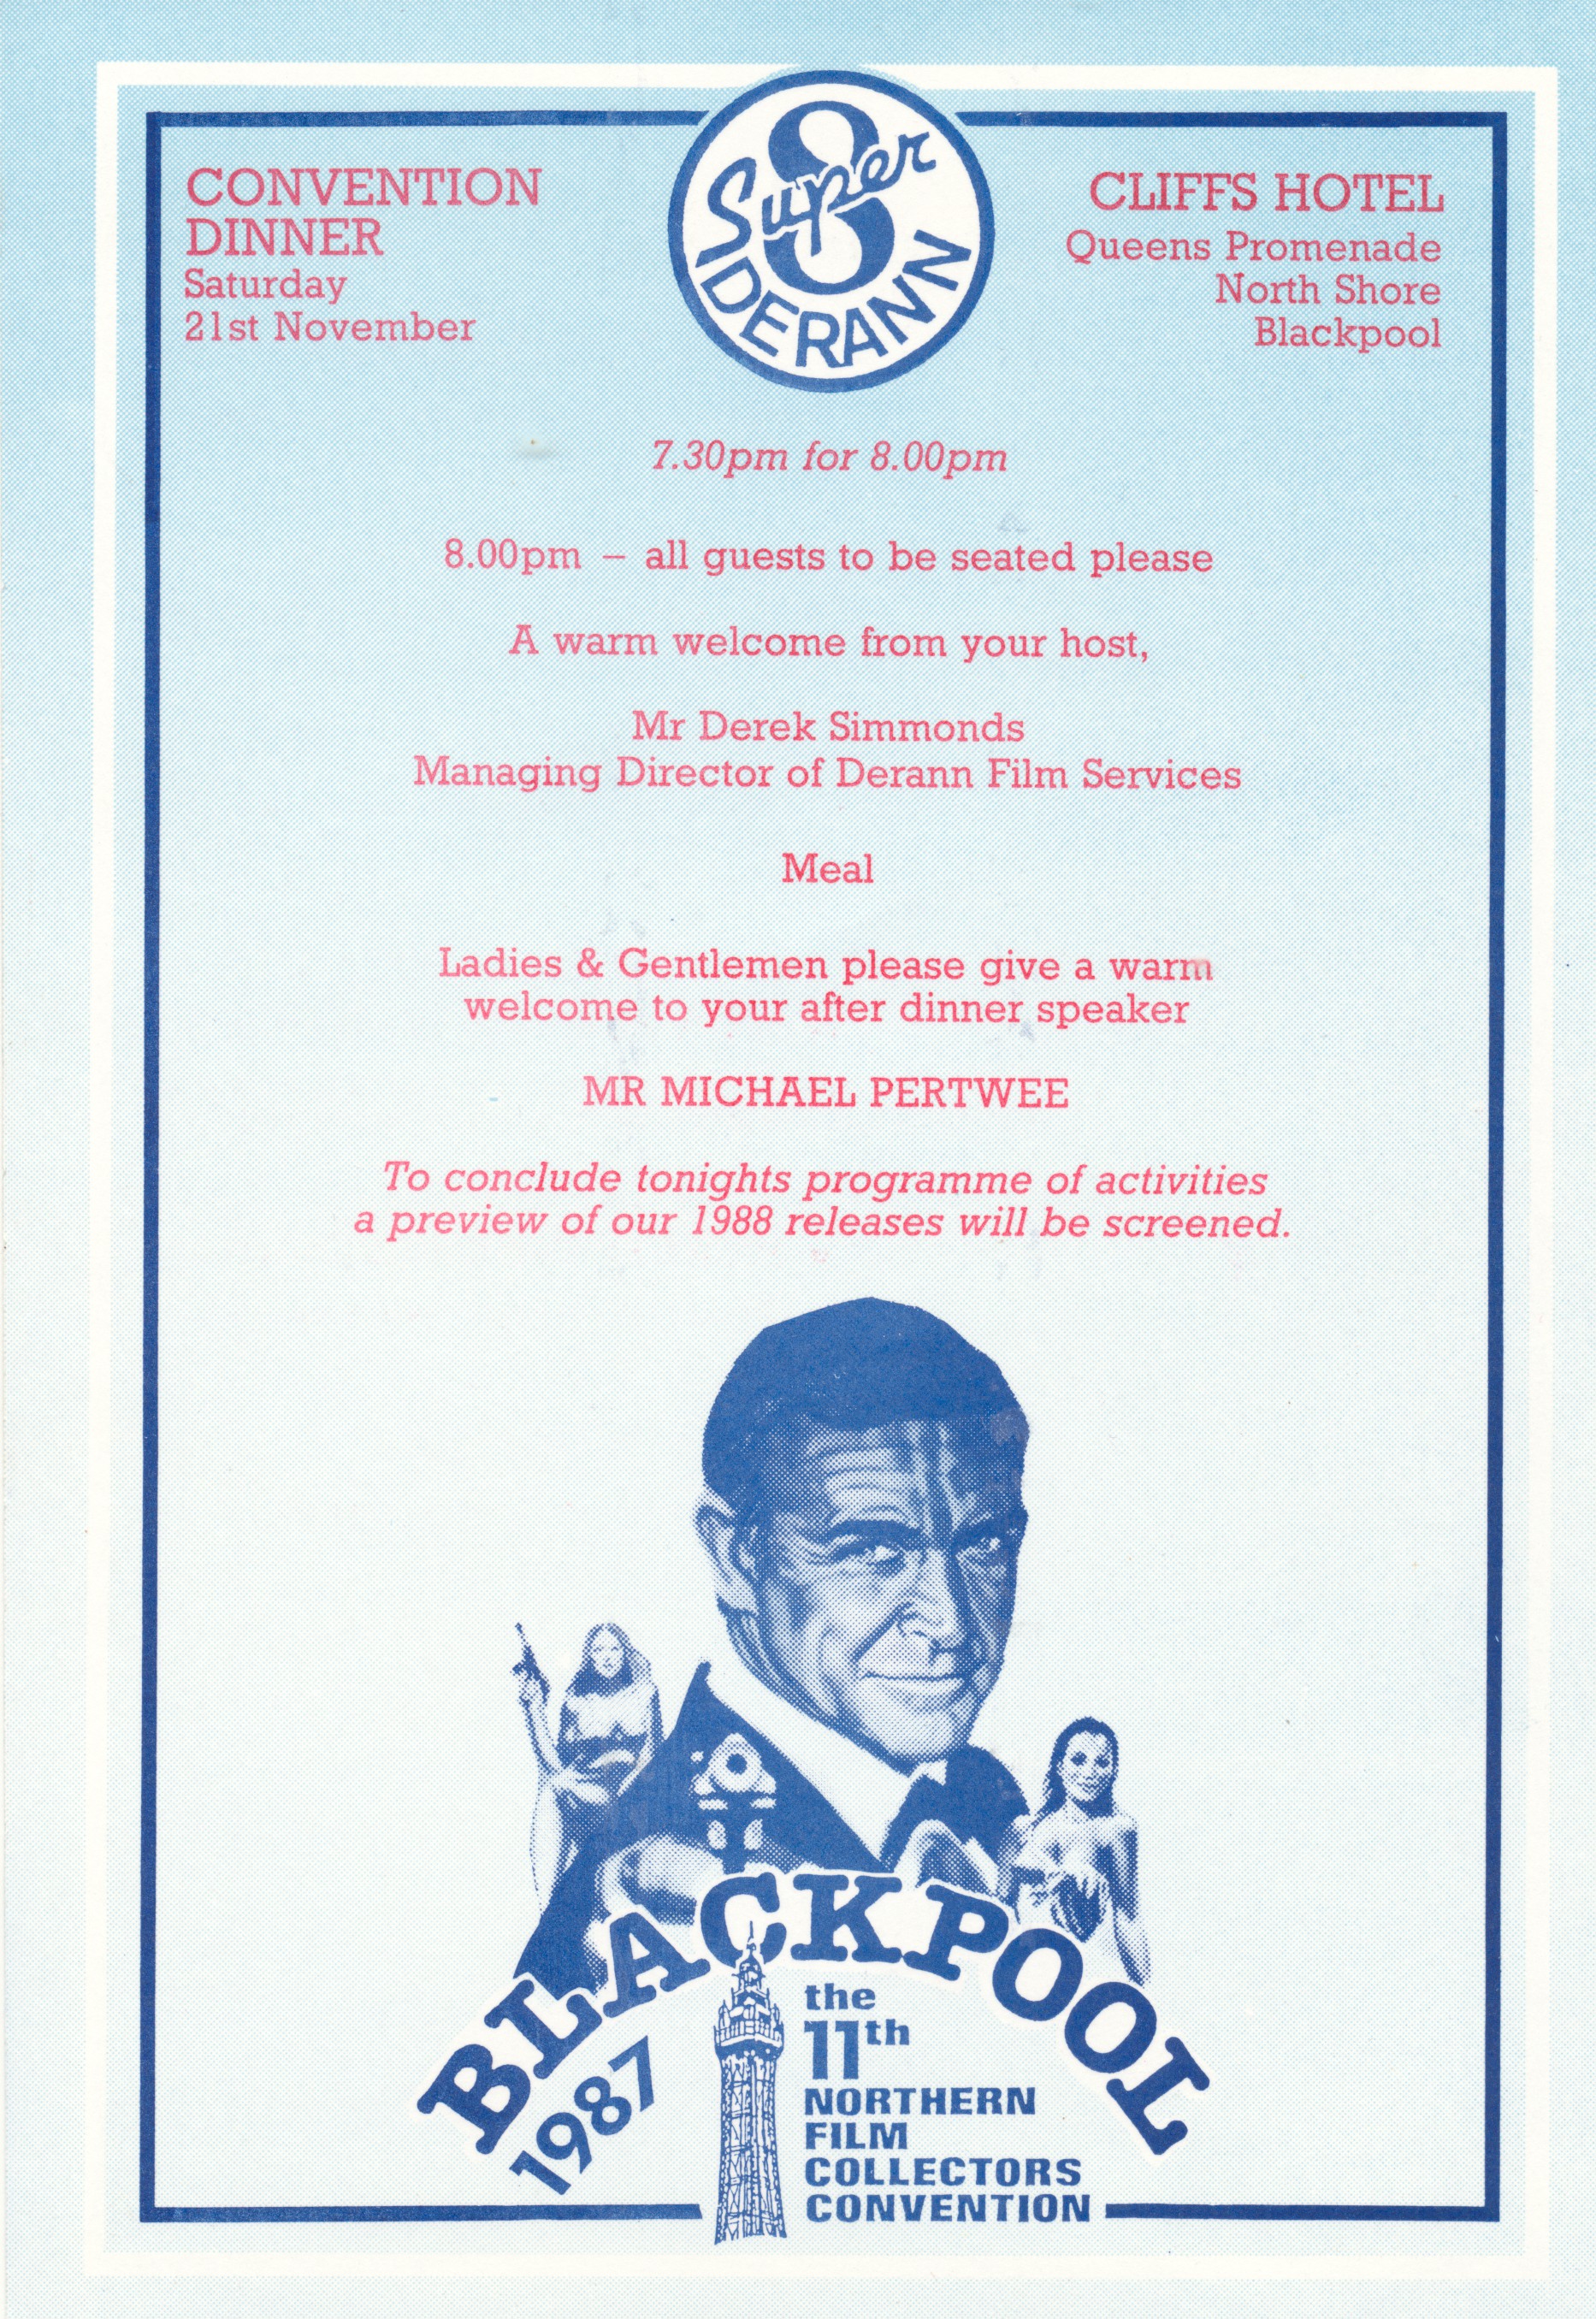 1987 Convention Dinner programme, page 1